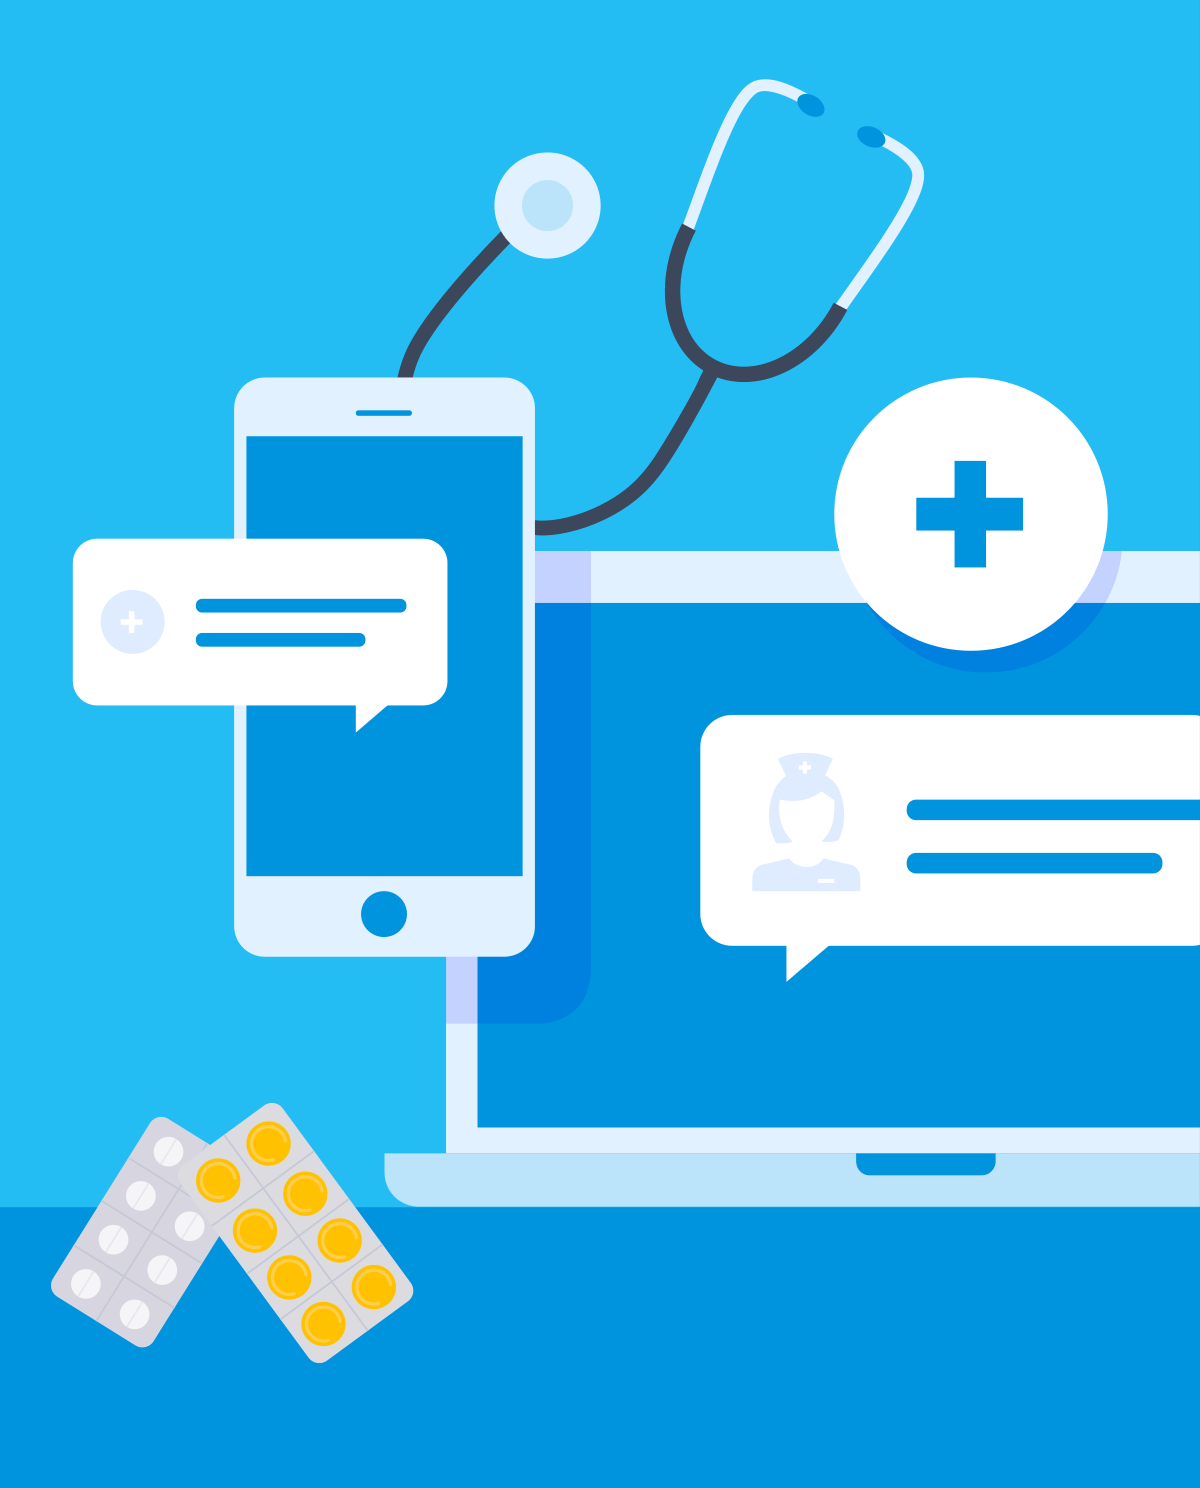 Telemedicine: consult a doctor without leaving home